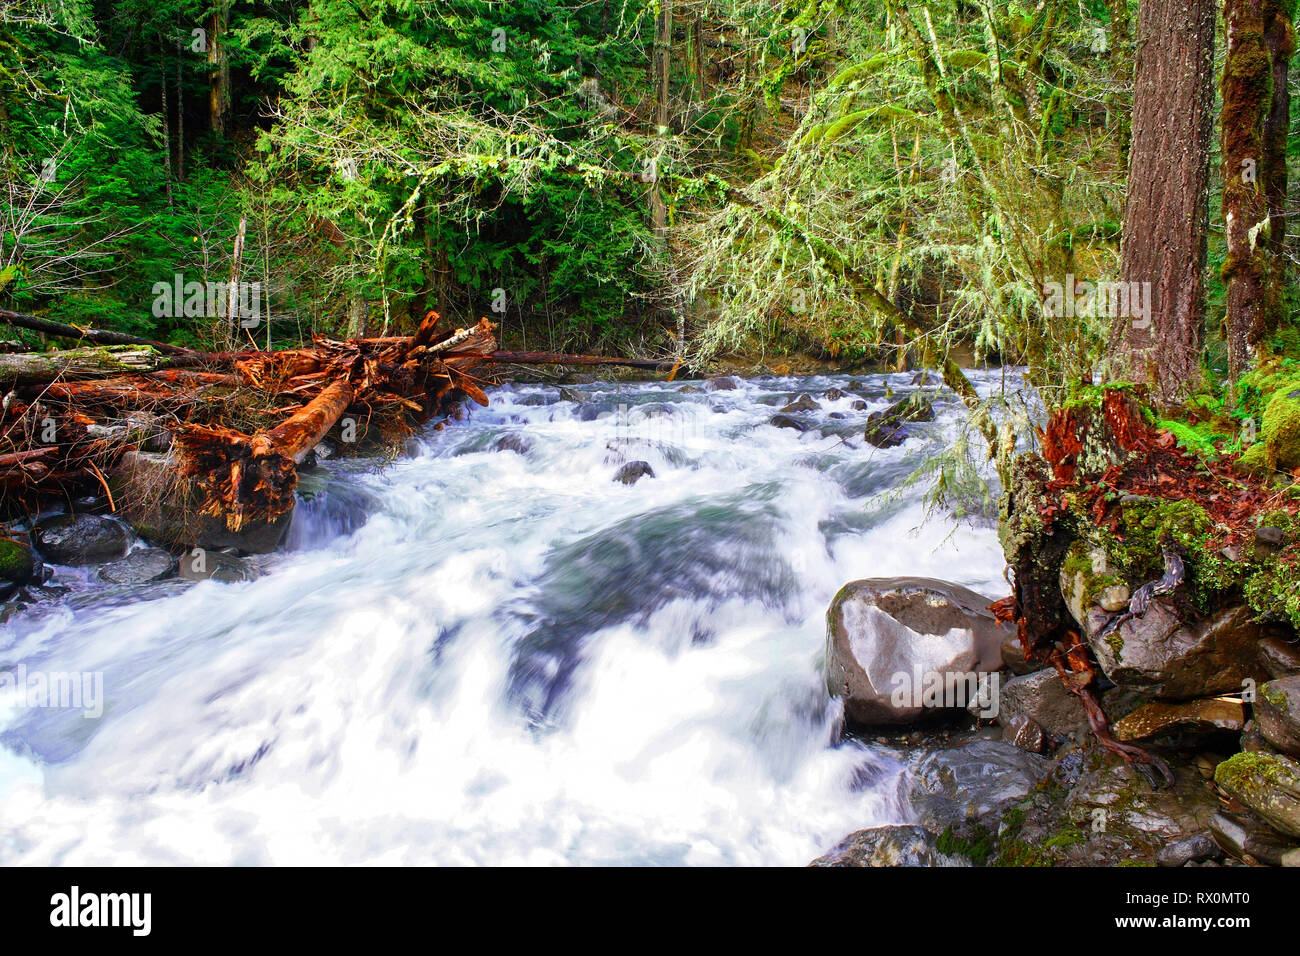 PHOTO: 40,562.02467 -- wild and scenic river rapids fast water conifer forest trees close up landscape stream whitewater logjam logs Stock Photo